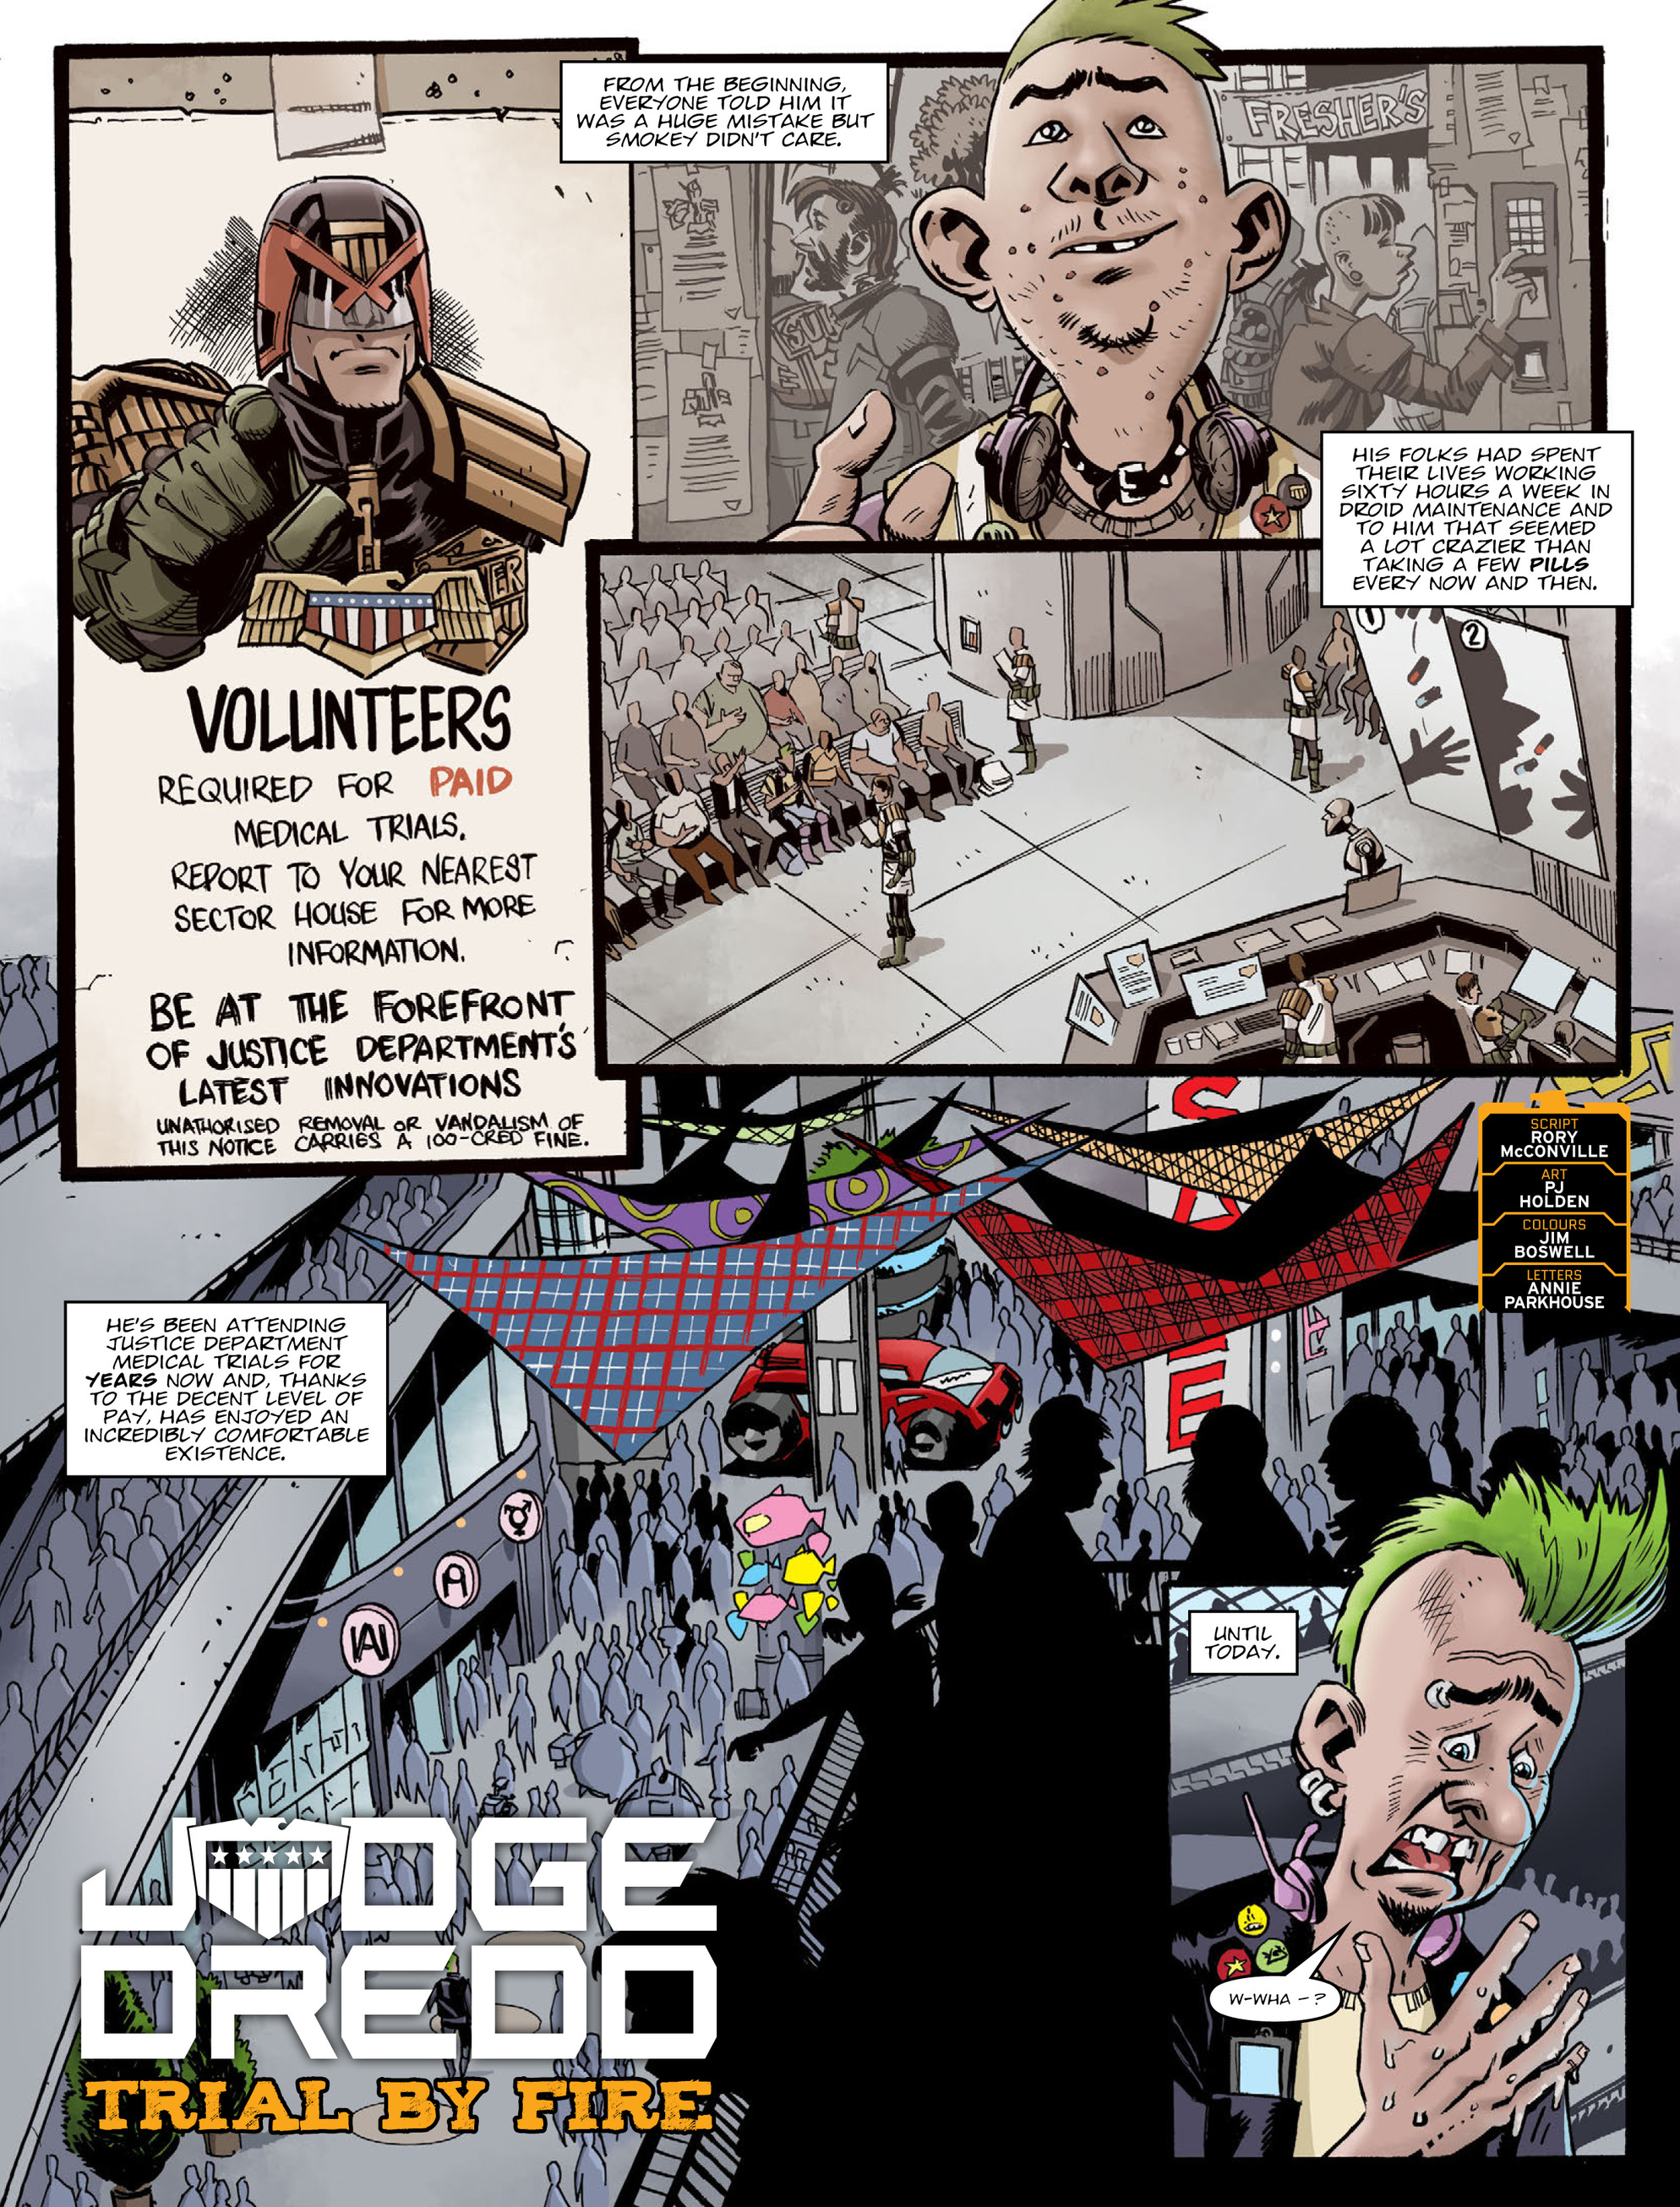 2000 AD: Chapter 2110 - Page 3